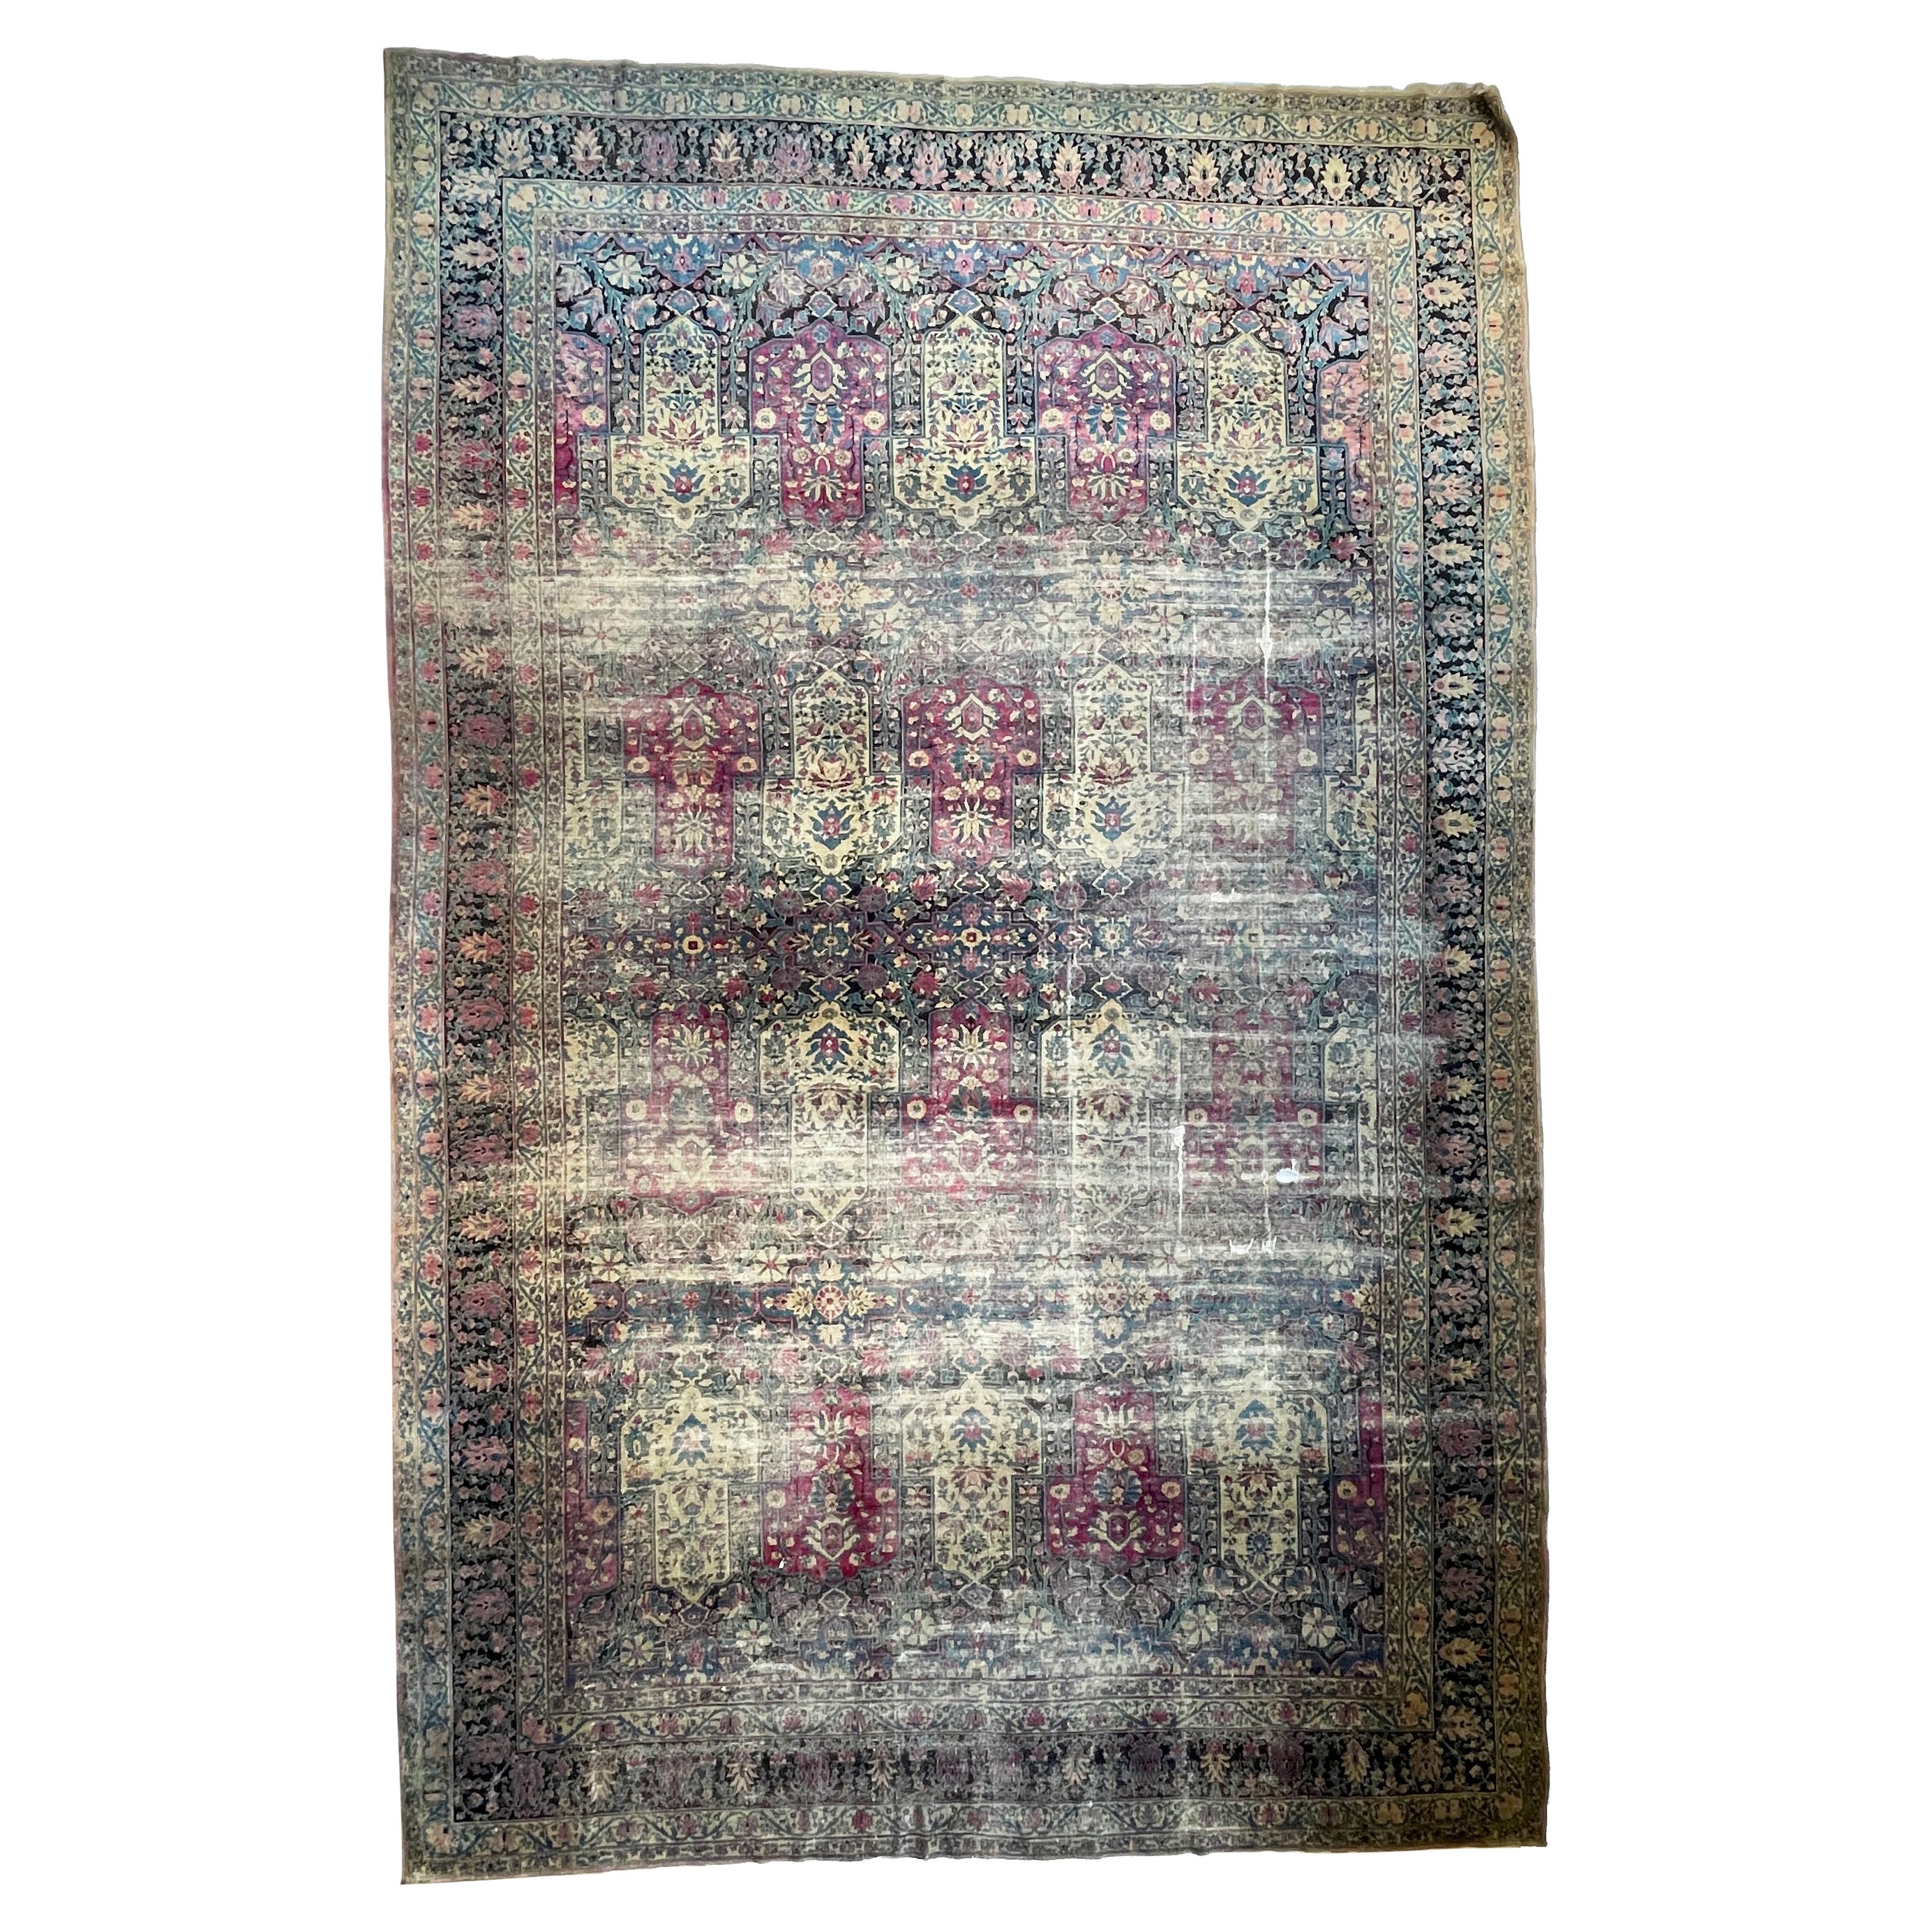 Palace Size Iconic Garden Inspired Design Rug, c. 1900's For Sale